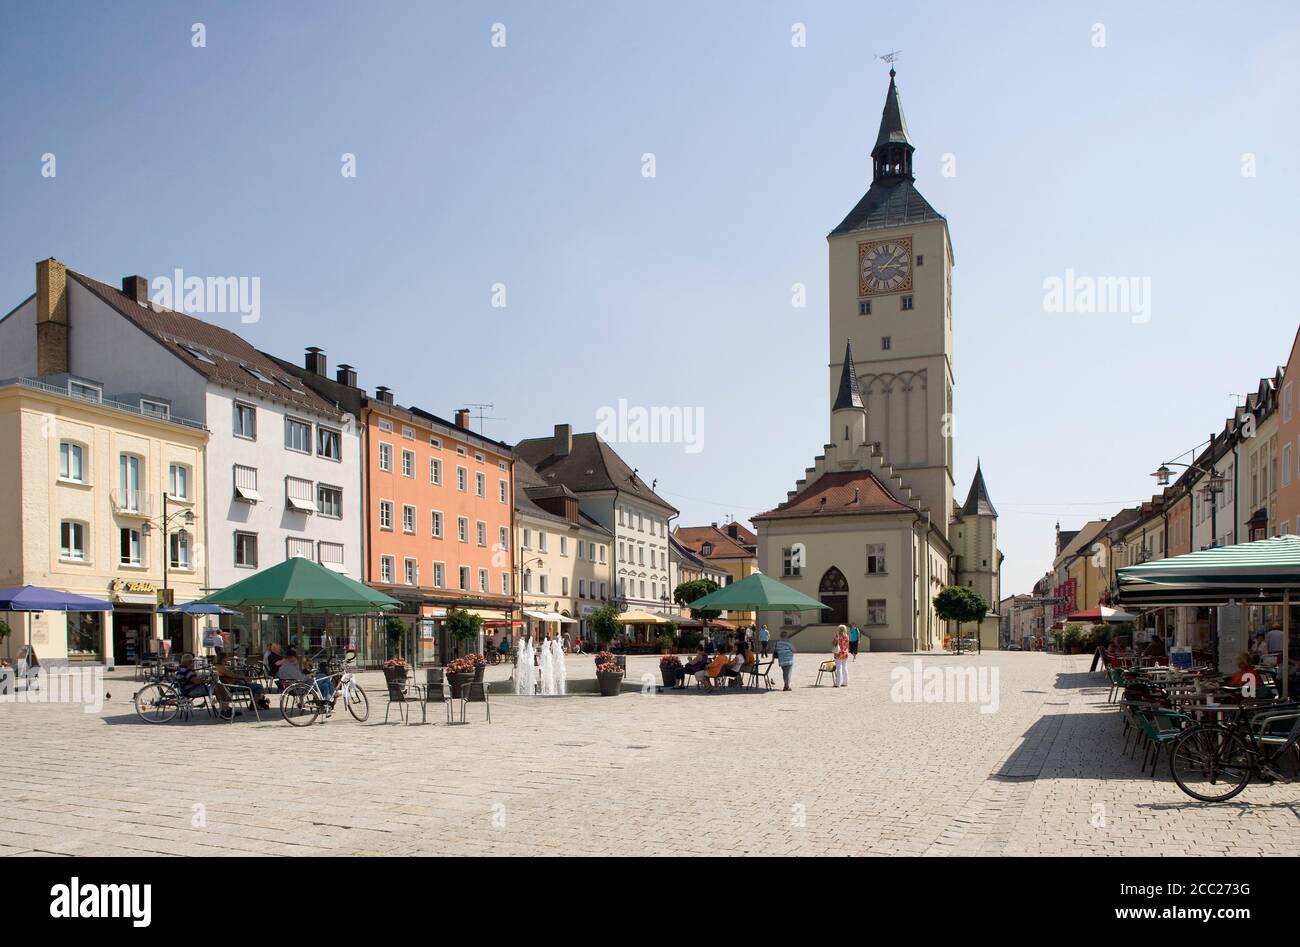 Germany, Bavaria, Deggendorf, Old Town, Town Hall and Square Stock Photo